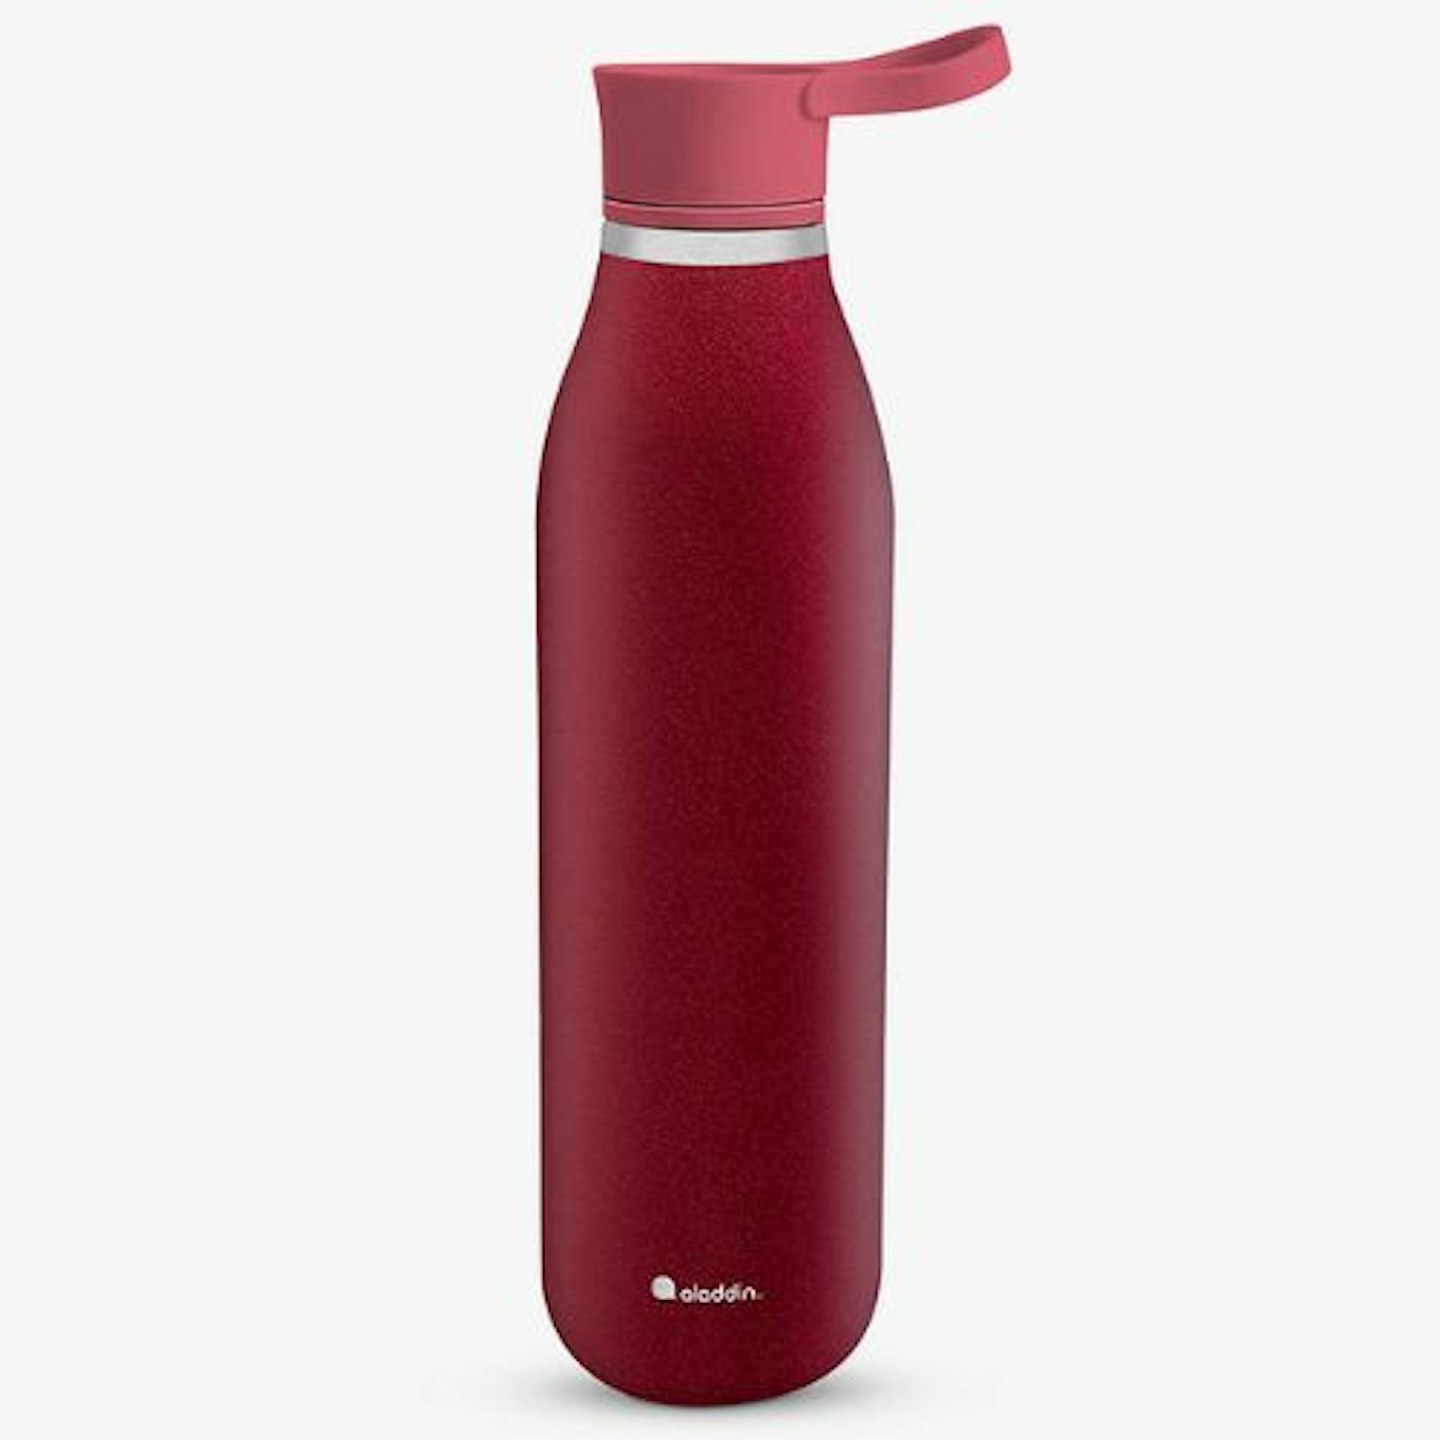 Aladdin eCycle Insulated Stainless Steel Leak-Proof Drinks Bottle